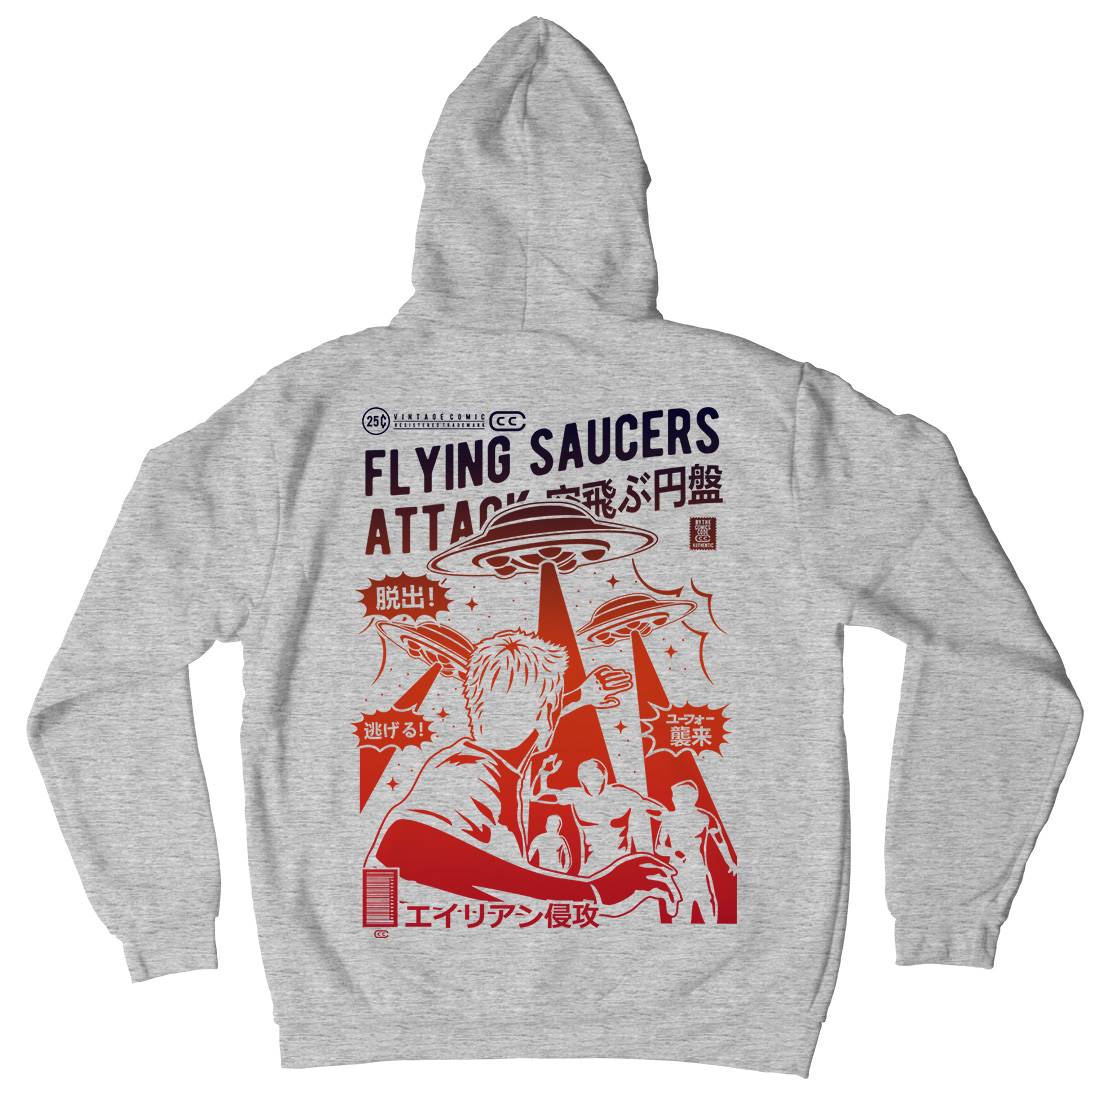 Flying Saucers Mens Hoodie With Pocket Space A230